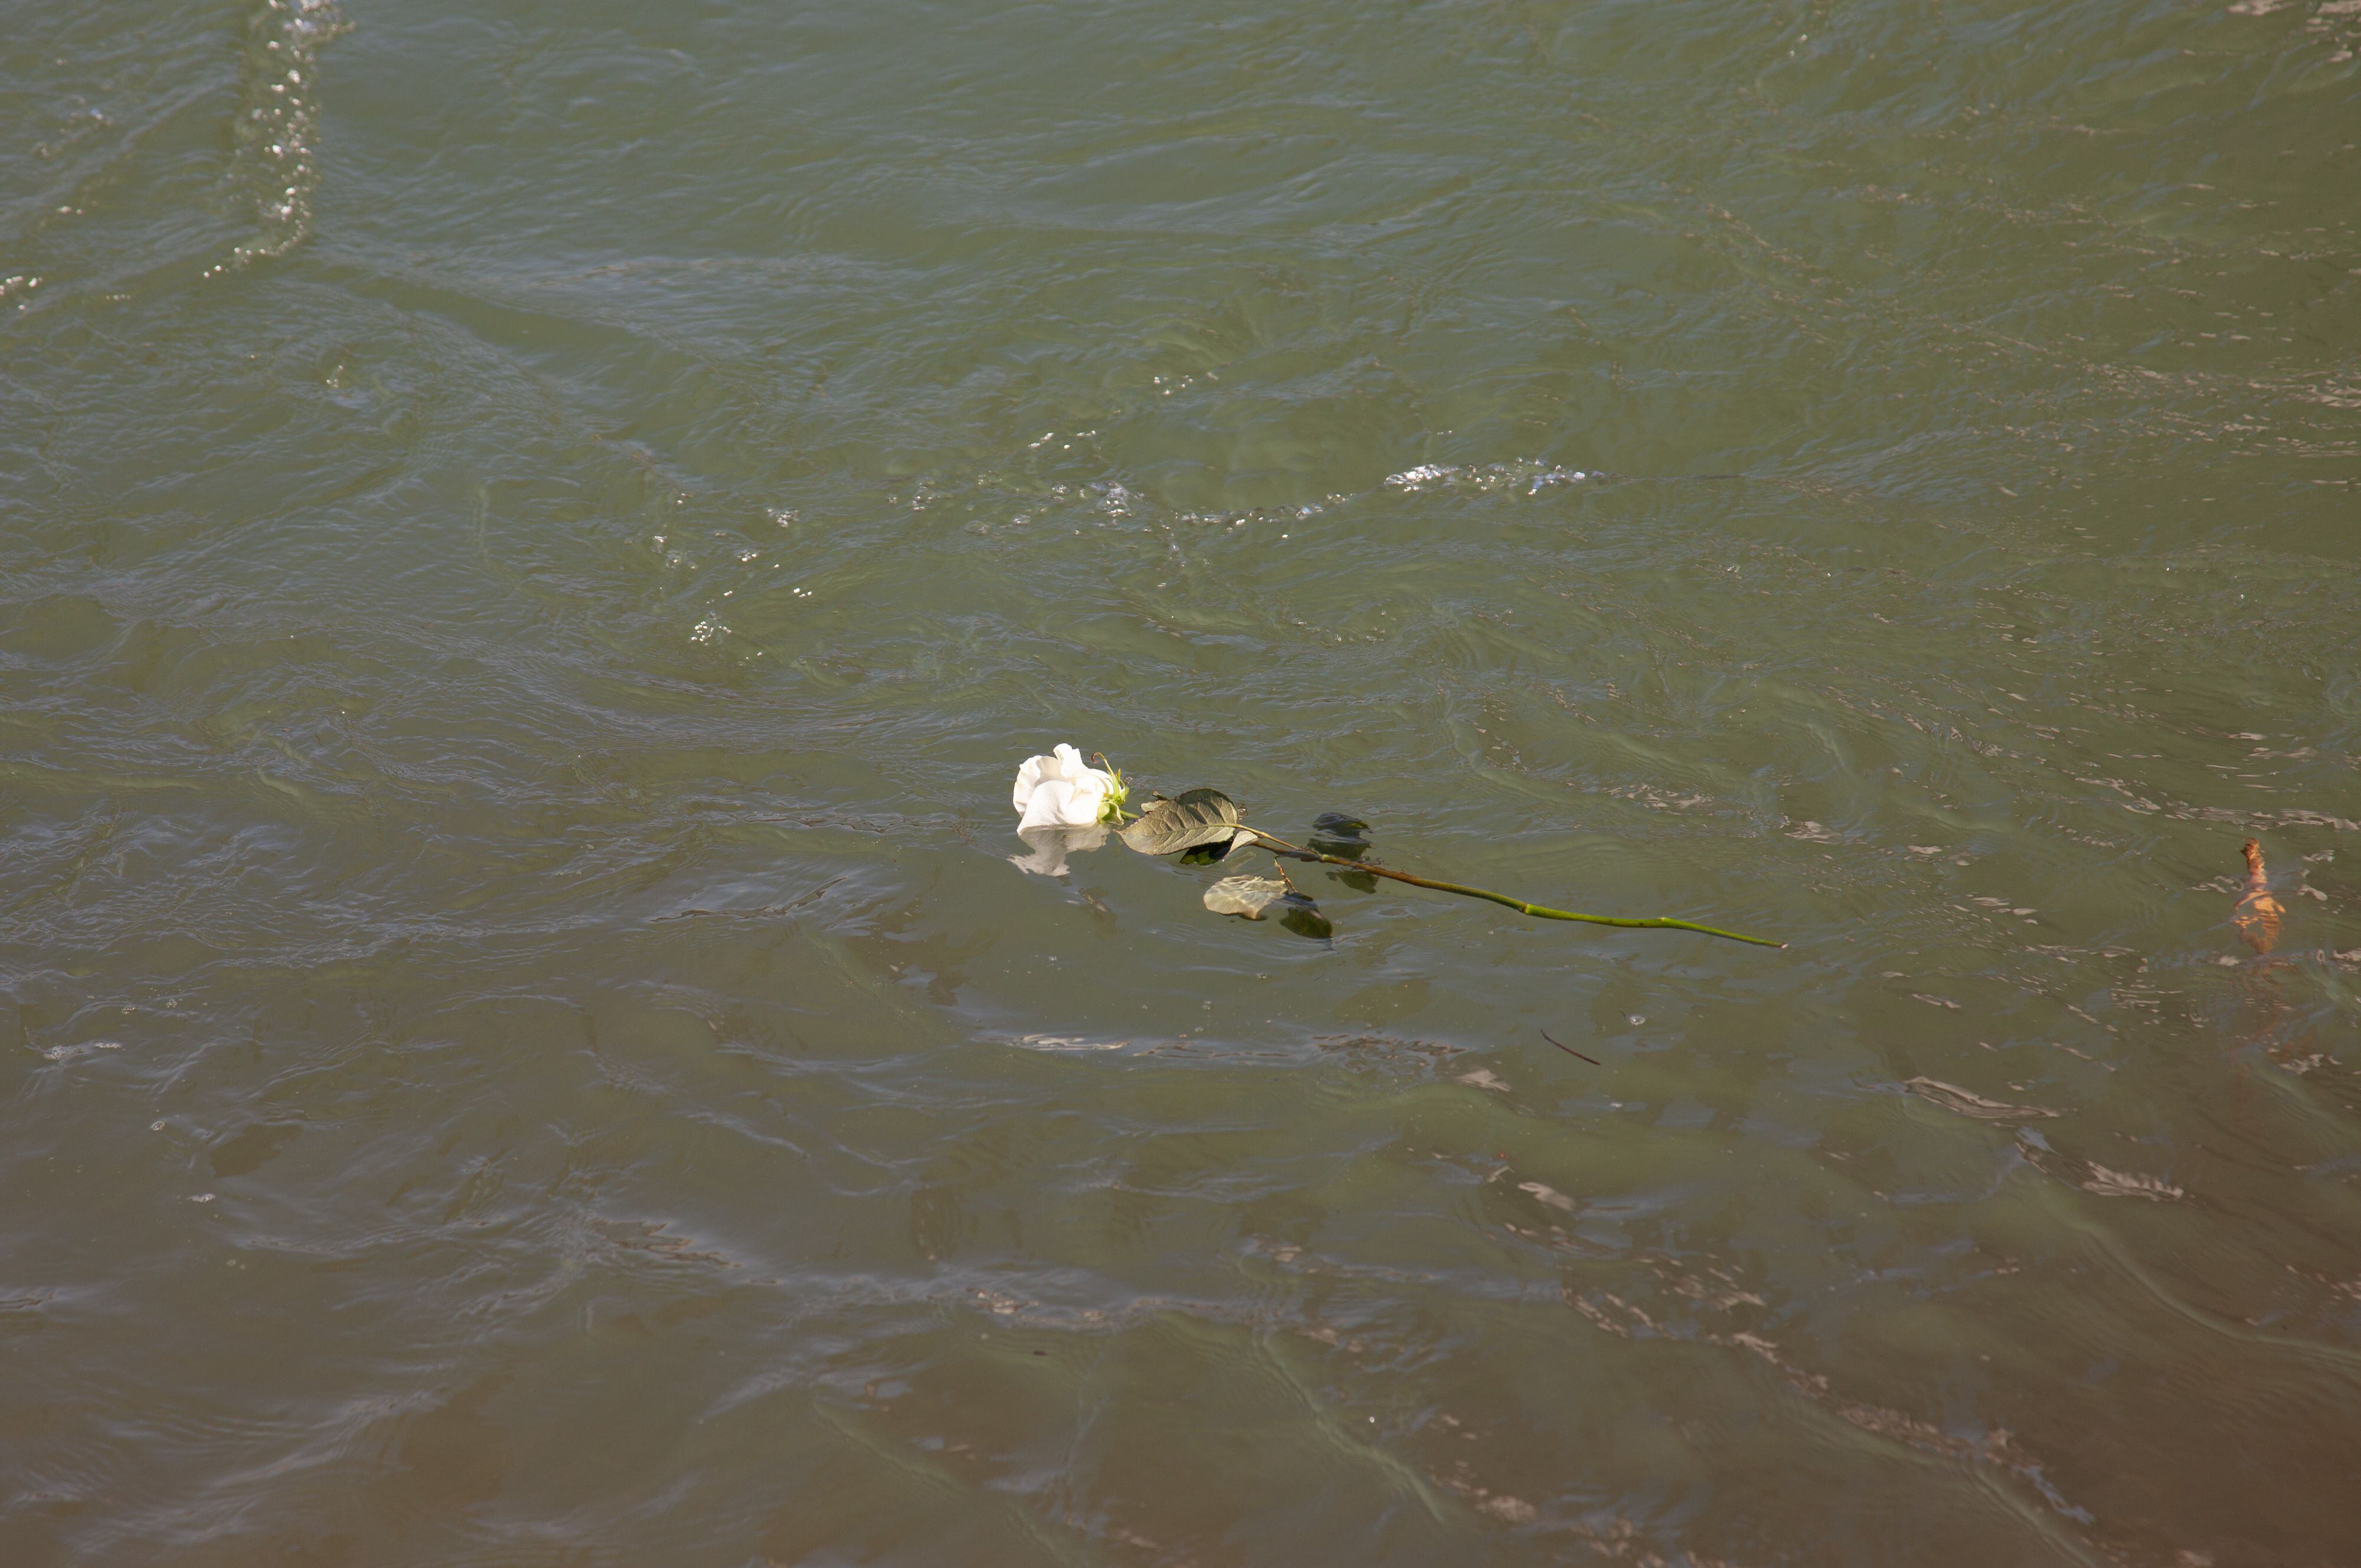 Nihad Suljić and Nenad Jovanović of Bosnia let white roses go in the Drina River to honor the 45 migrants who have drowned there en route to wealthier countries in Europe. 